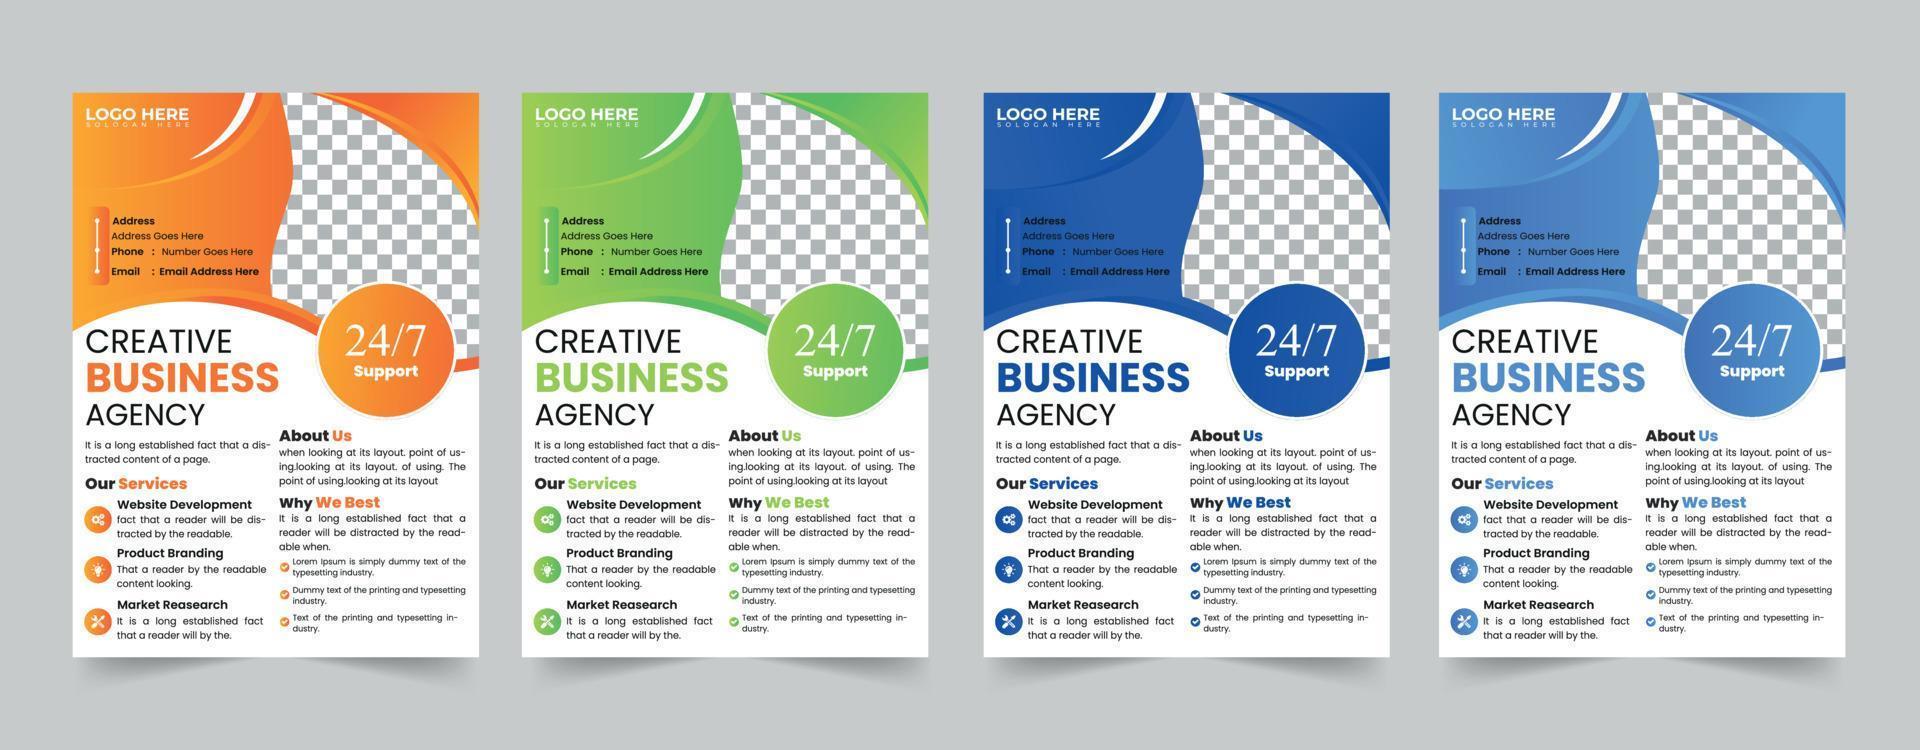 Brochure template layout design. Corporate business annual report, catalog, magazine, flyer mockup. Creative modern bright concept circle round shape vector